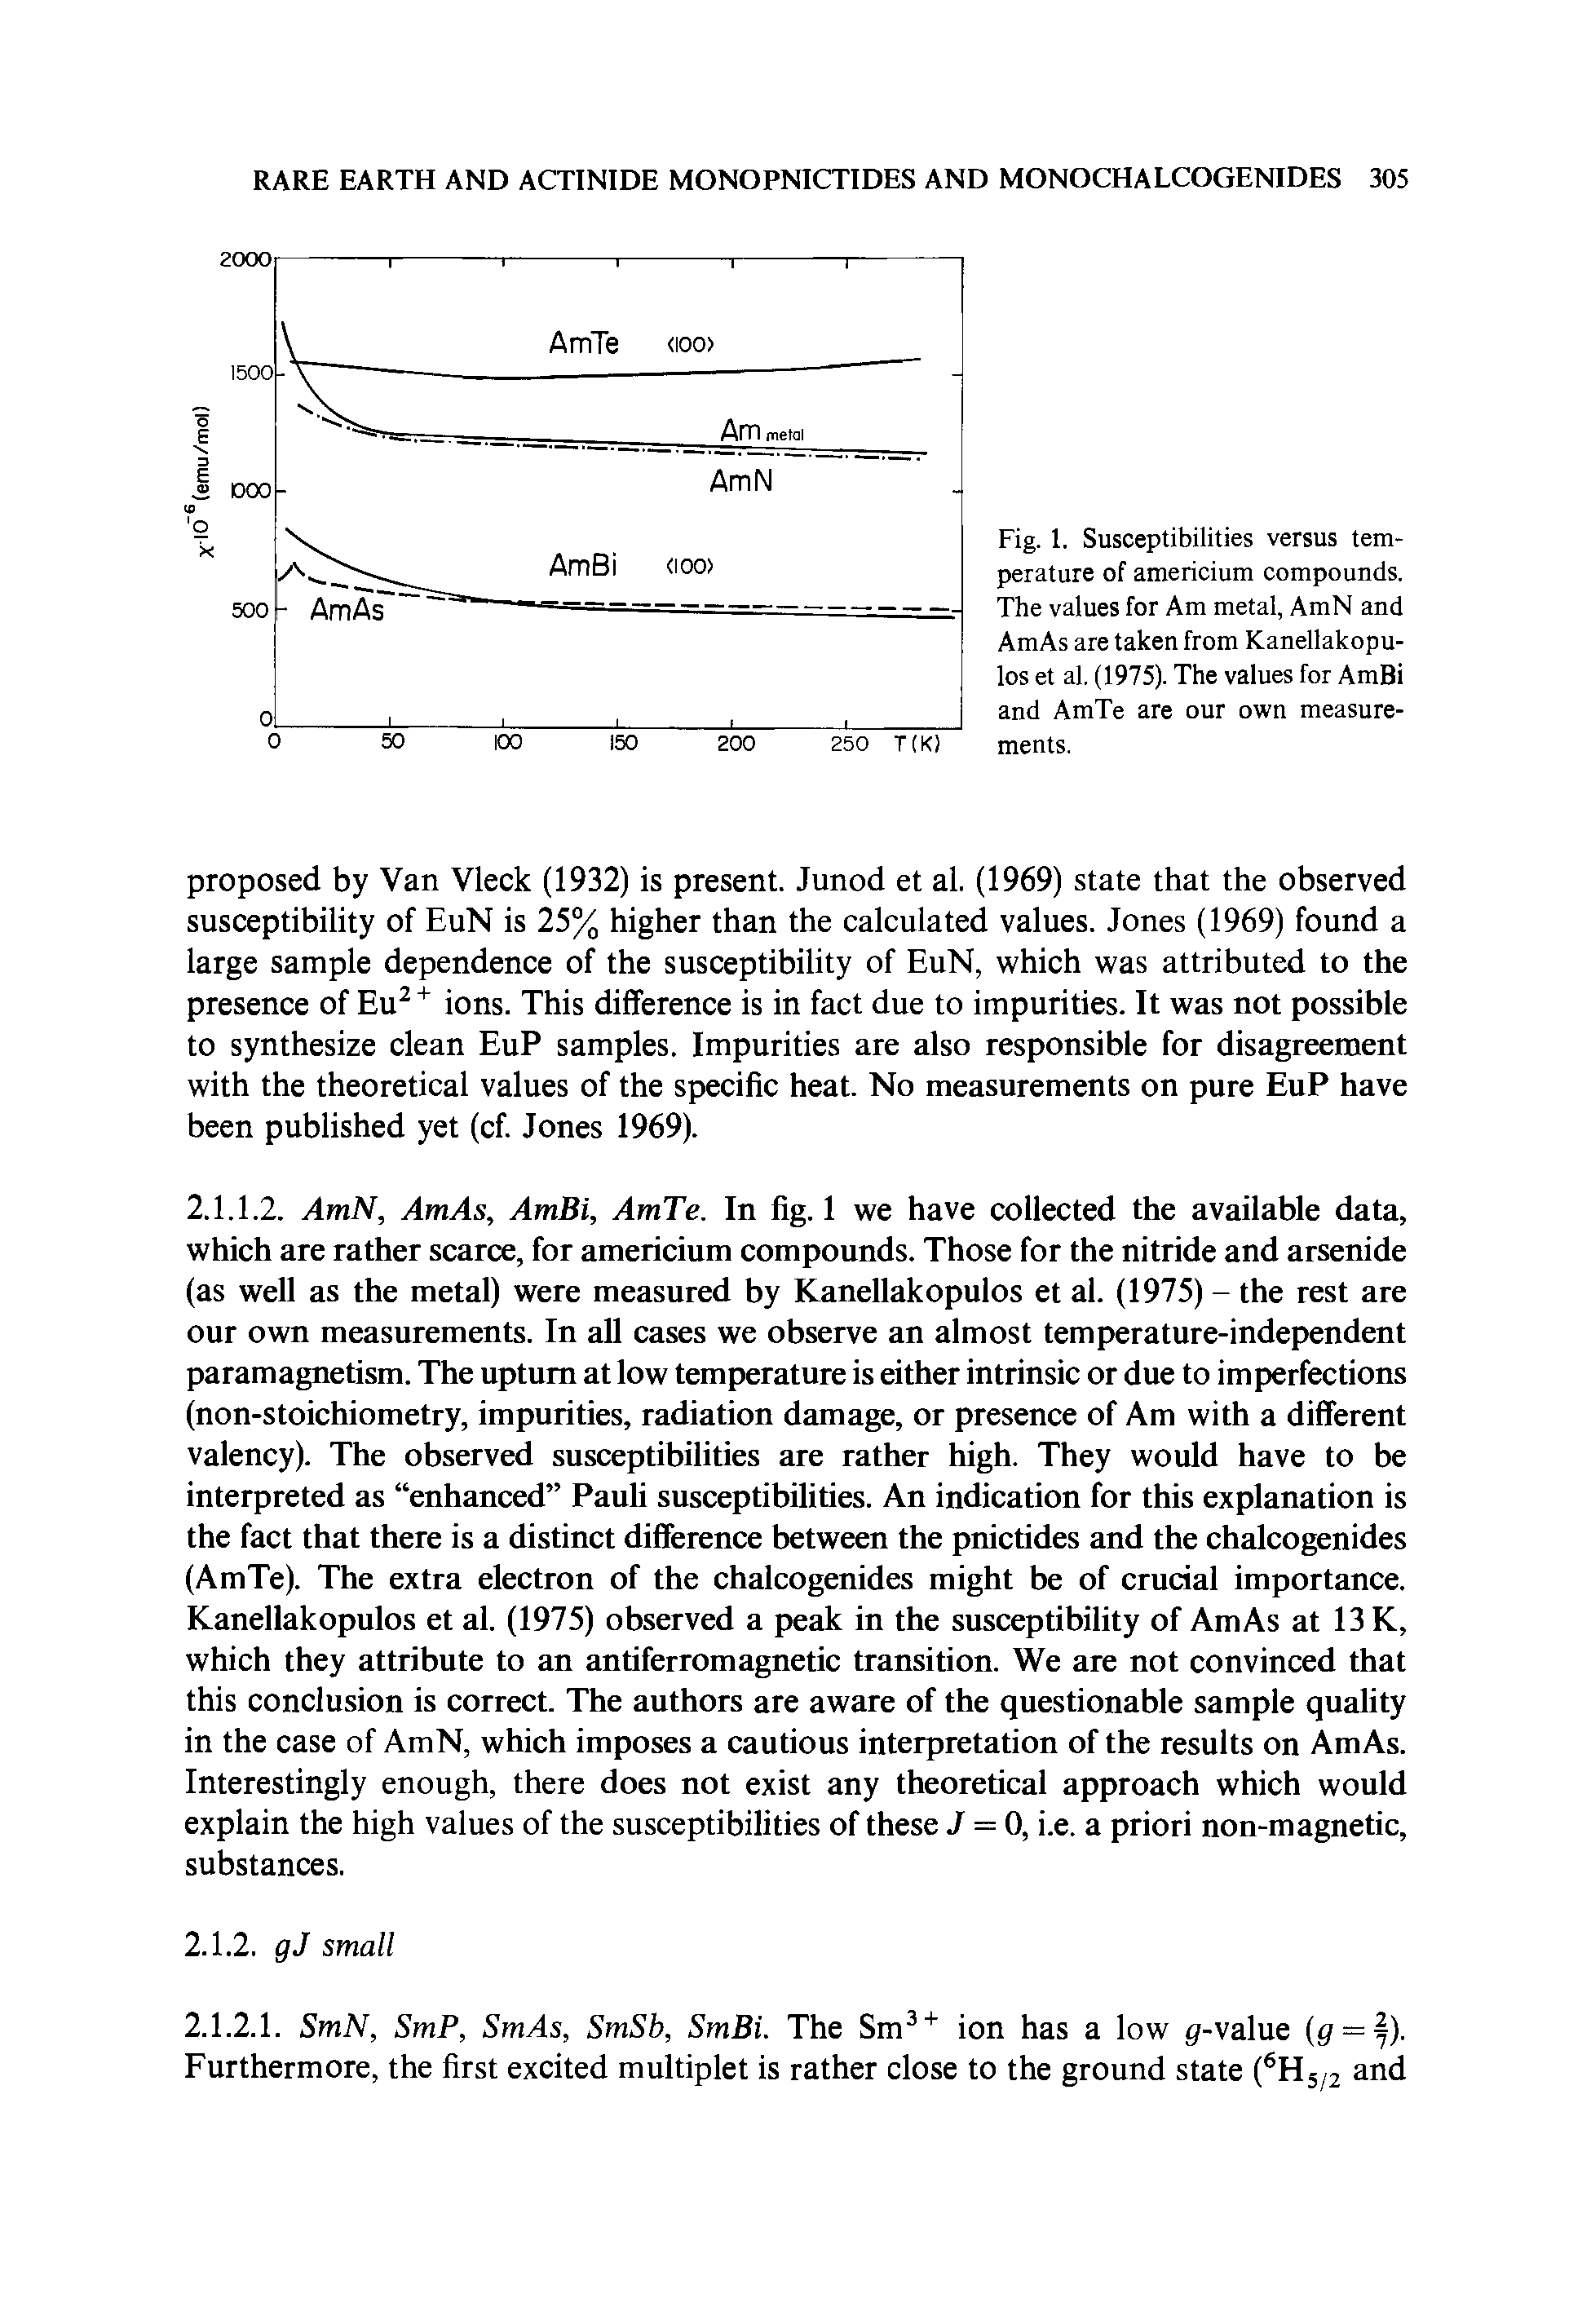 Fig. 1. Susceptibilities versus temperature of americium compounds. The values for Am metal, AmN and AmAs are taken from Kanellakopu-los et al, (1975). The values for AmBi and AmTe are our own measurements.